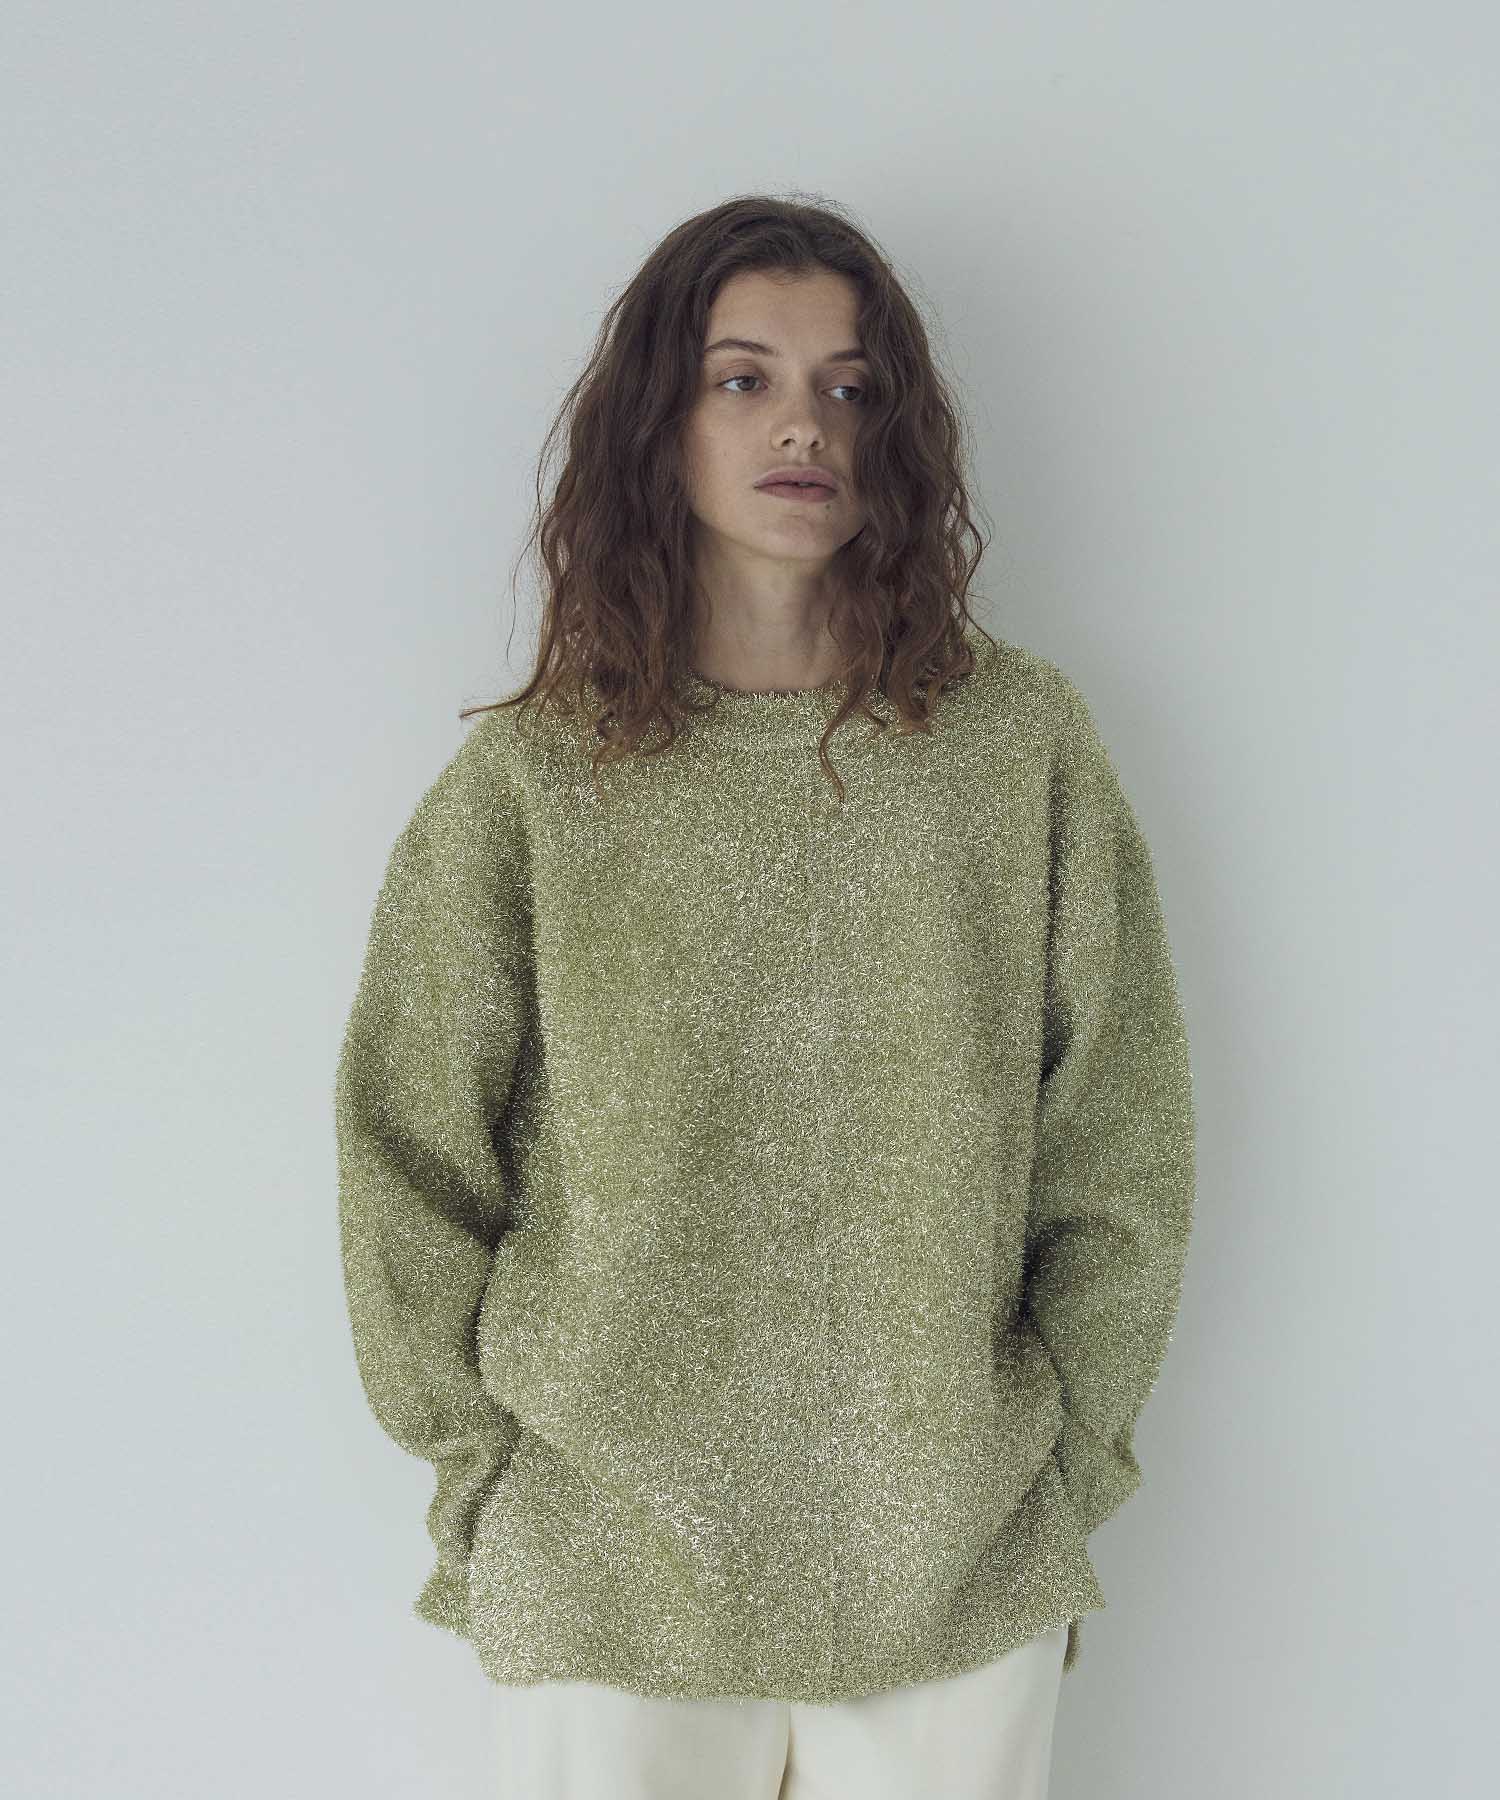 VENIT＞metallic shaggy pullover | AND ON JIONE STORE（アンドオン